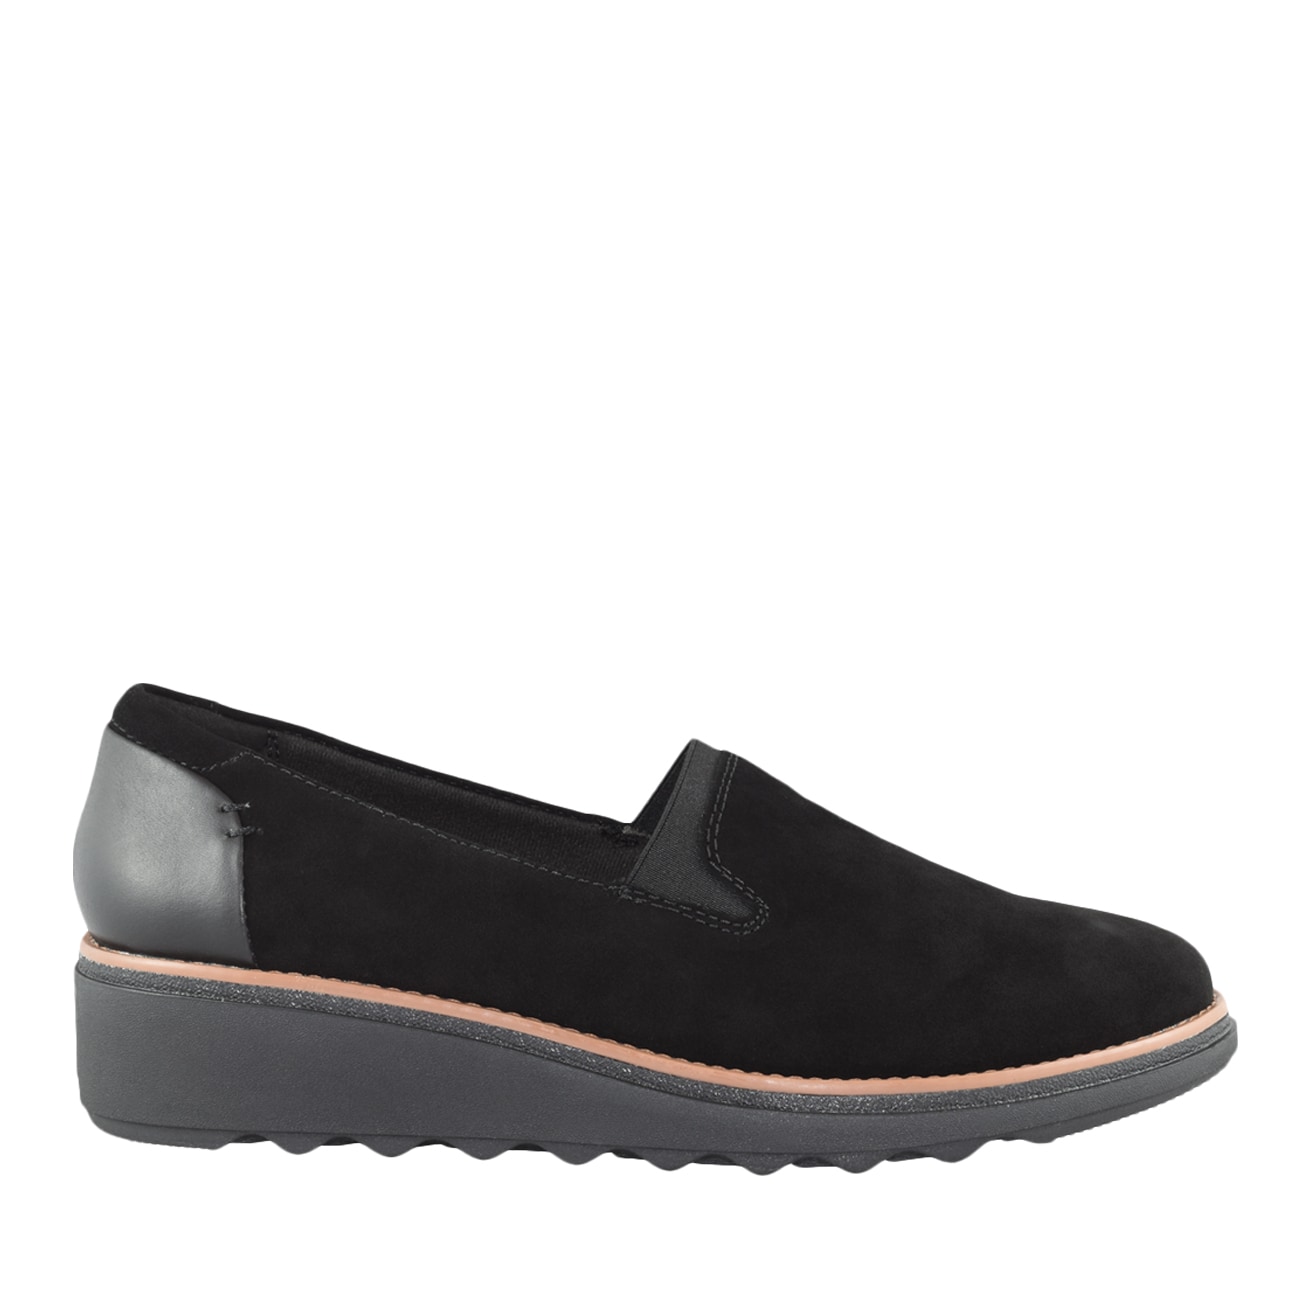 clarks wedges canada